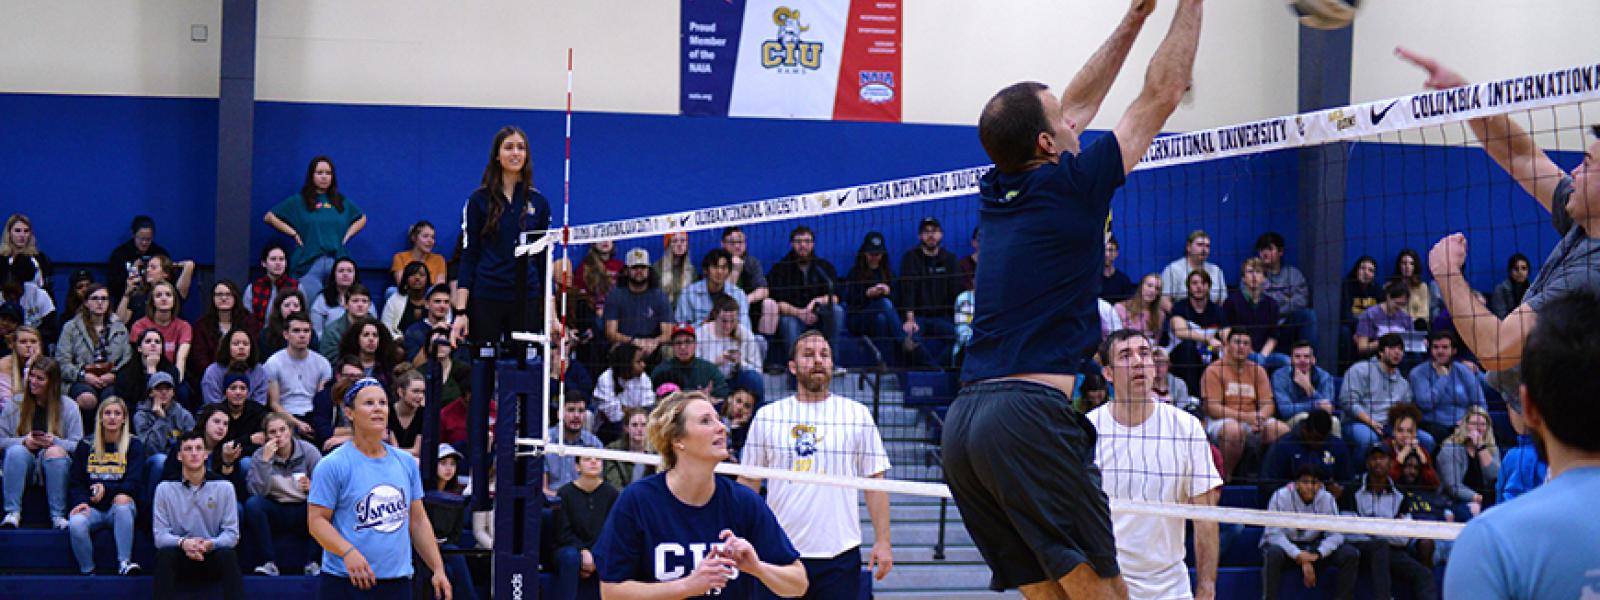 CIU Athletics Director James Whitaker attempts to block a shot at the Faculty/Staff Volleyball Match.